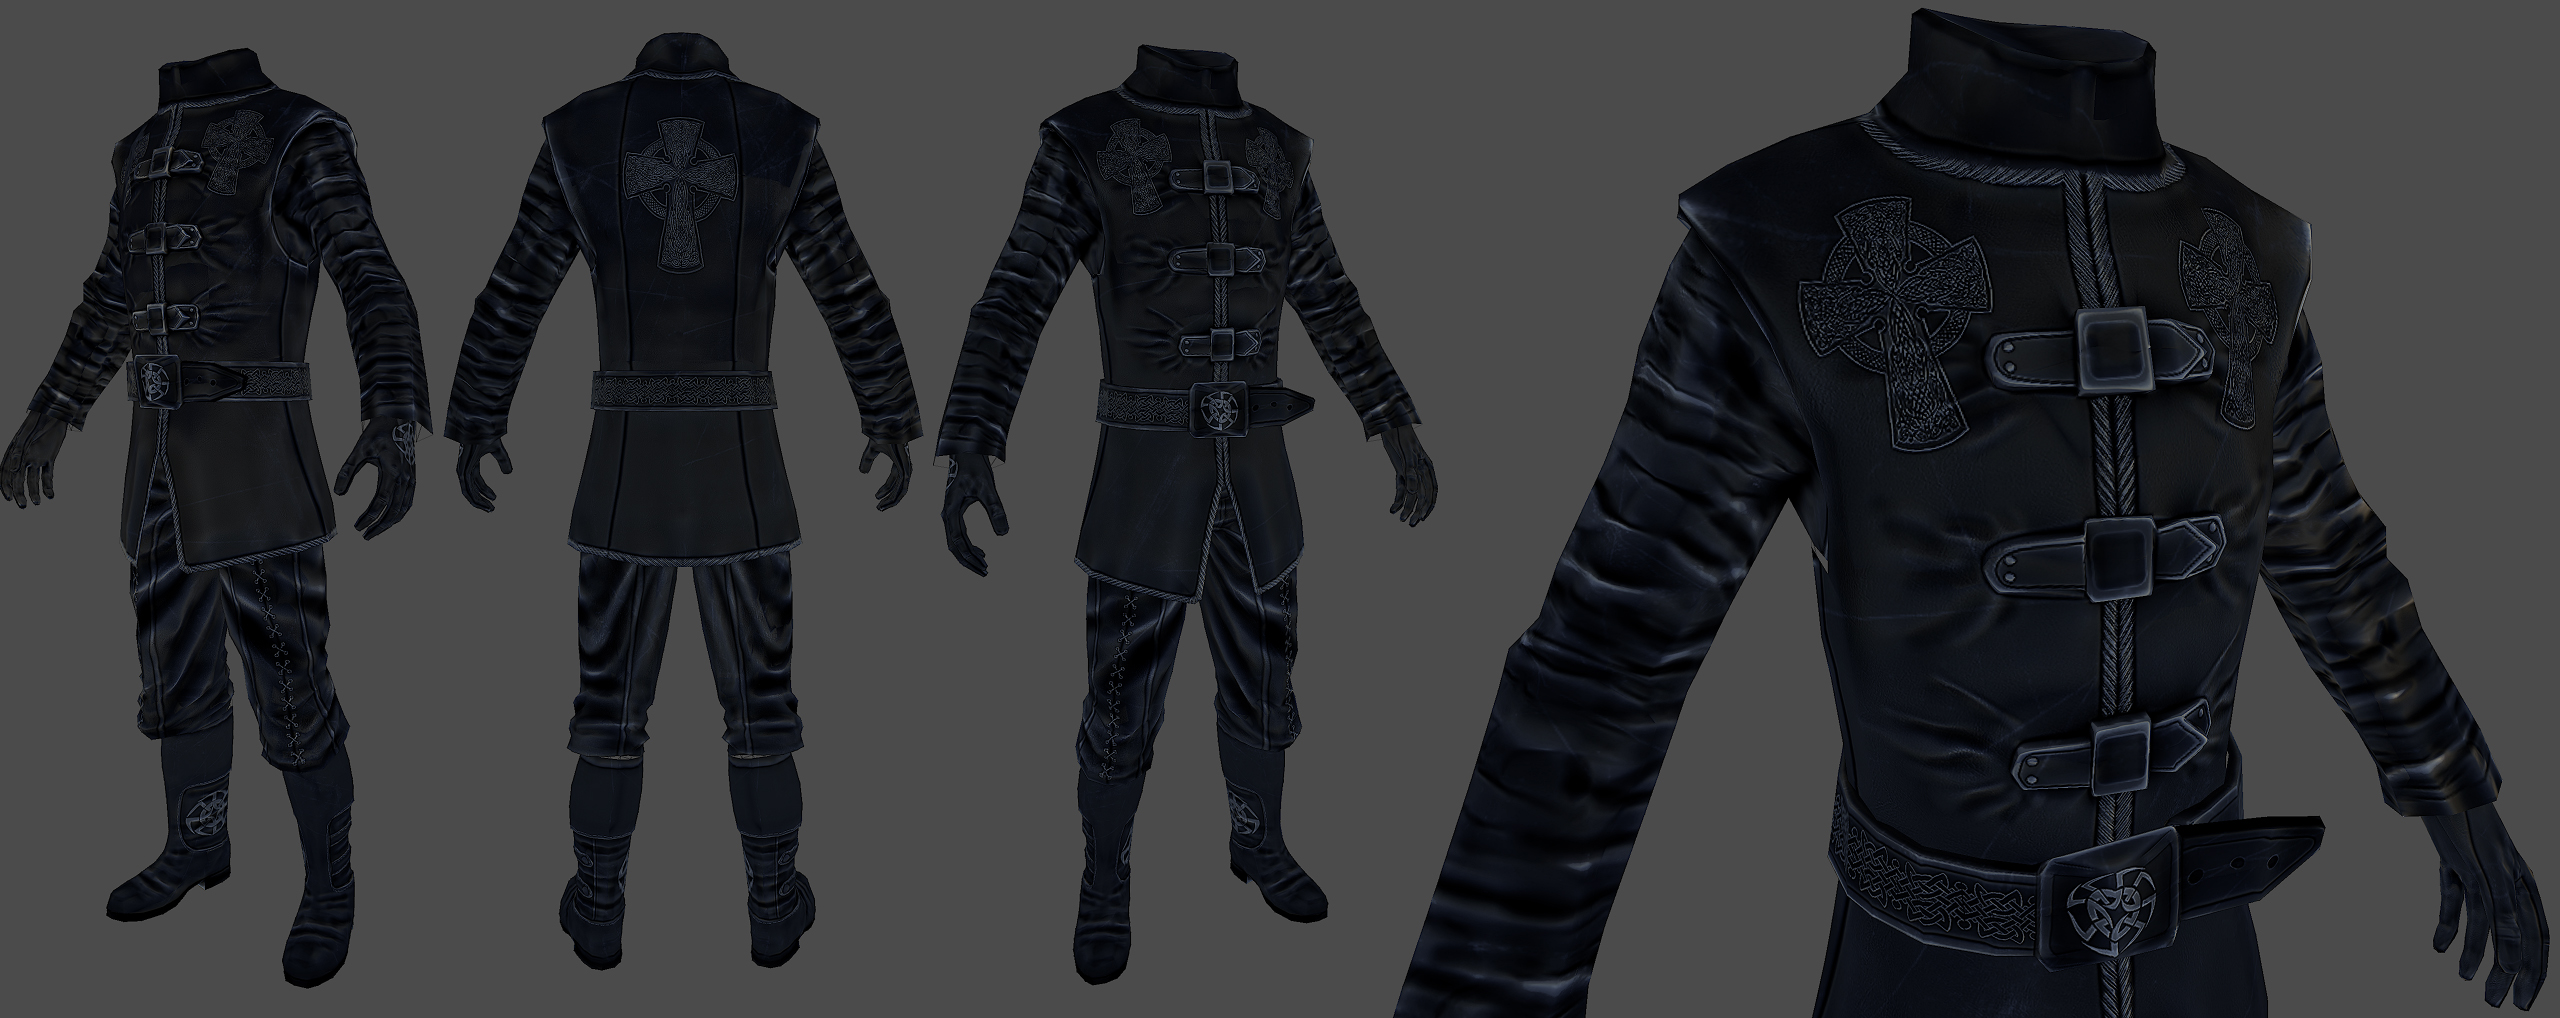 Witch Hunter Armor By Newermind43 On Deviantart.